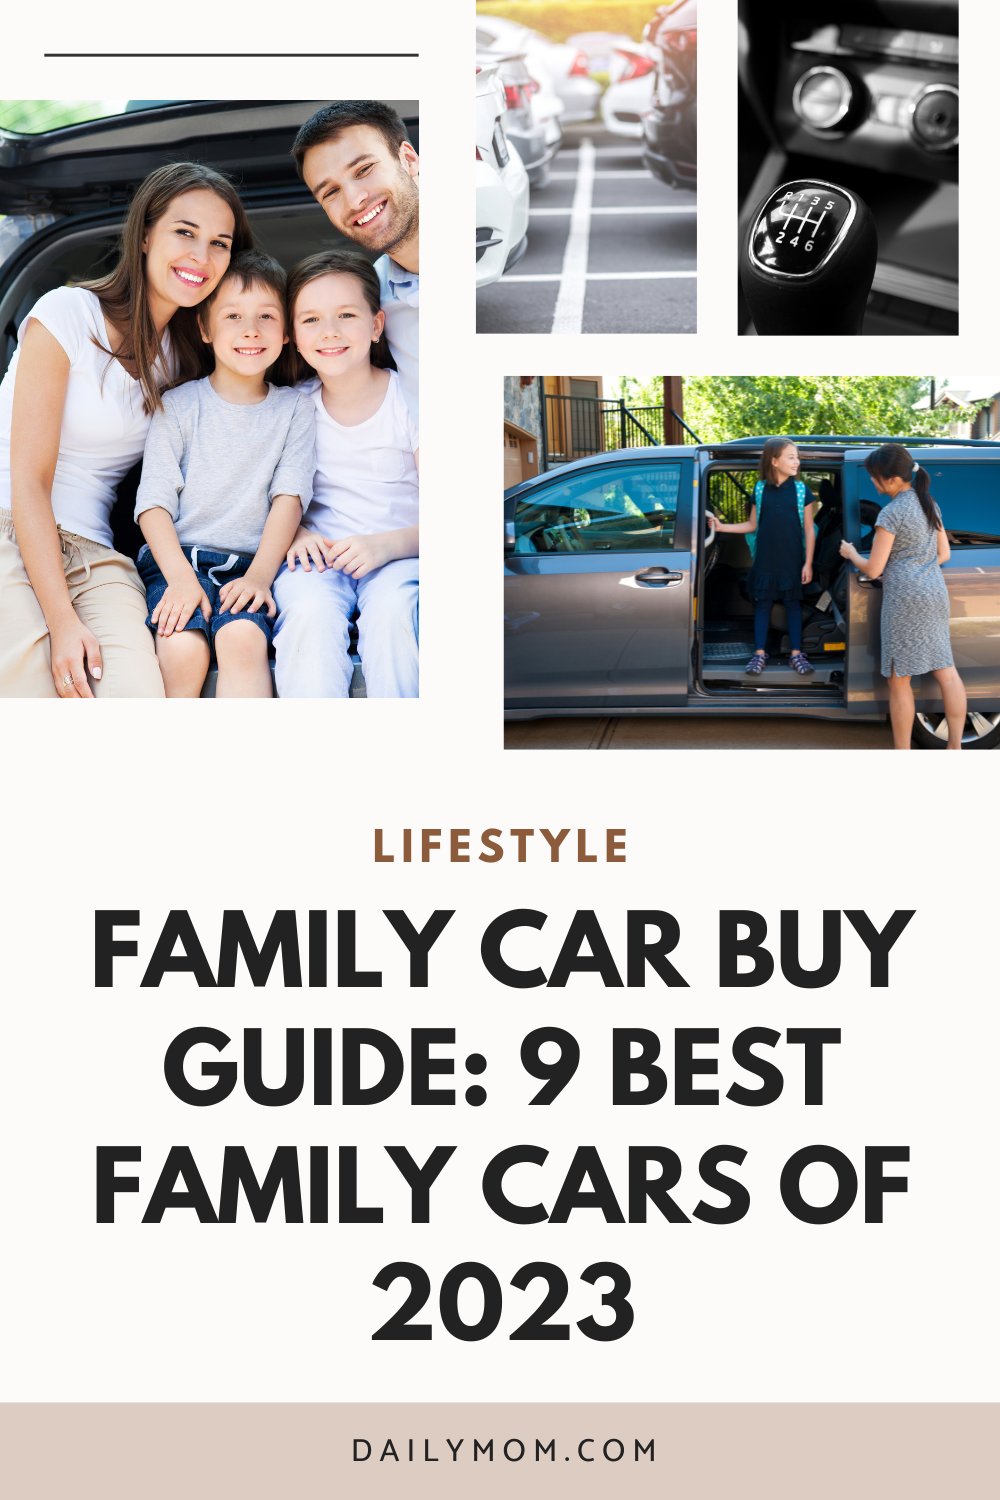 How To Choose The Best Family Car For Your Family